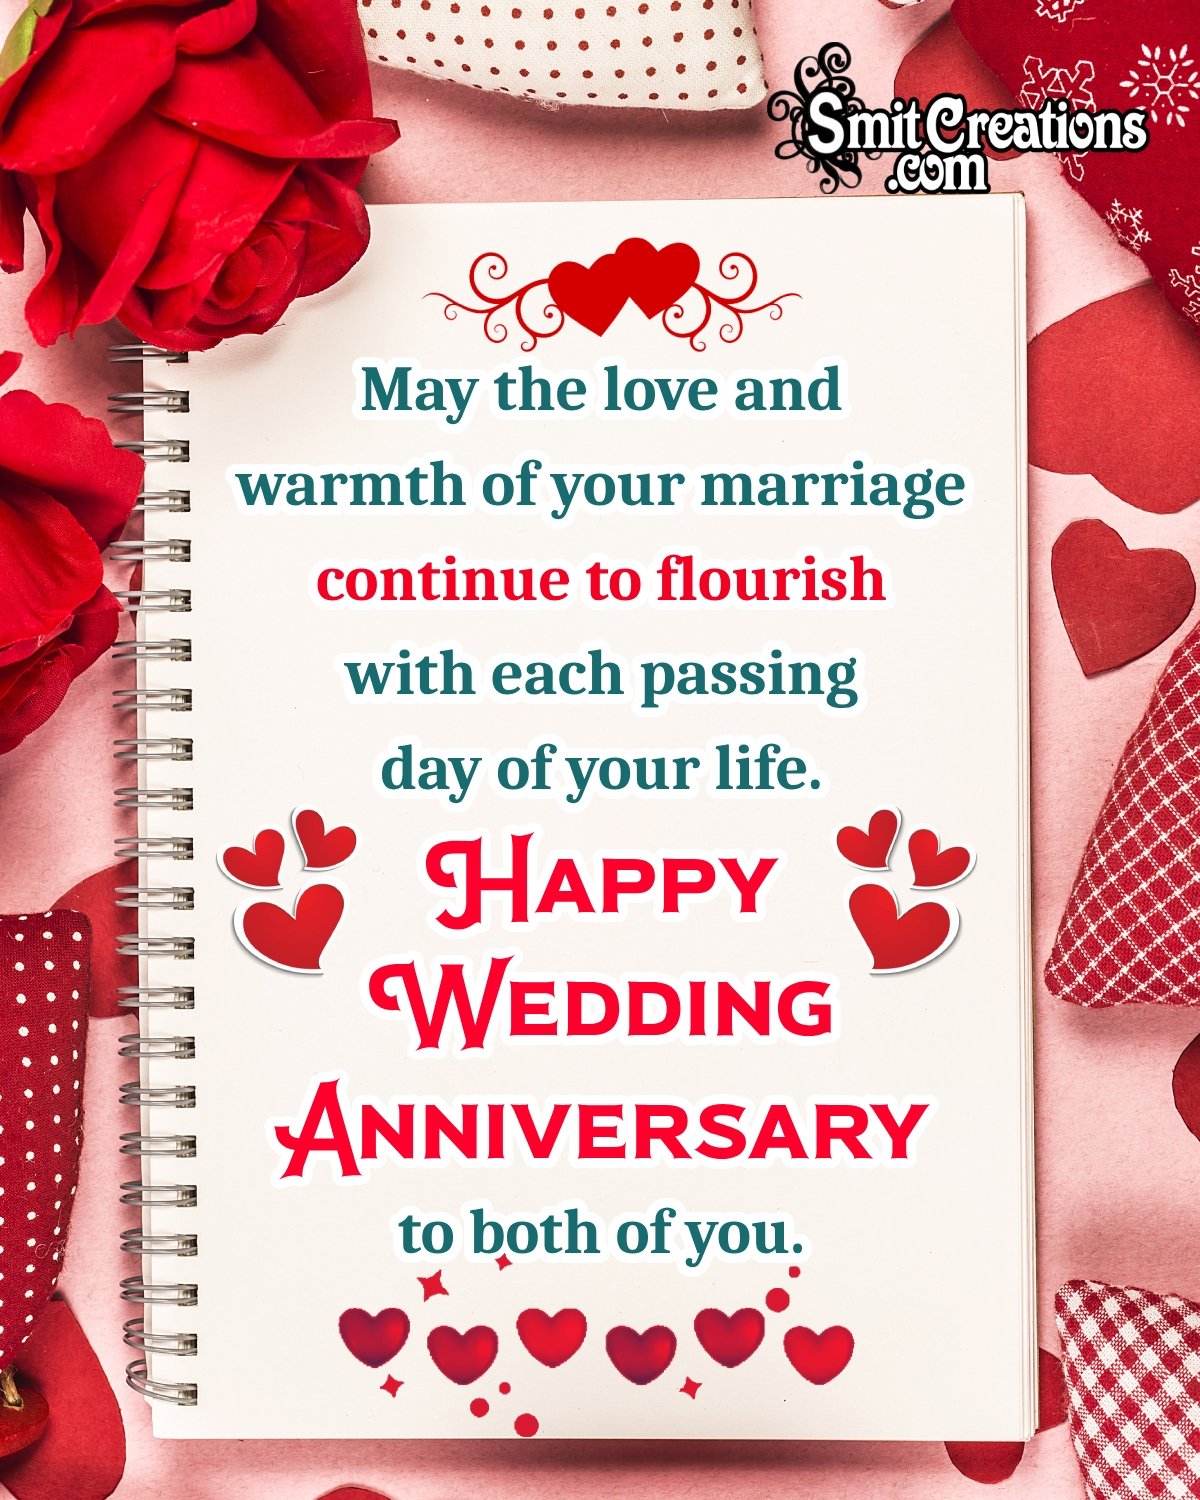 60+Anniversary Wishes - Smit Creations – Your Daily Dose of Fun.